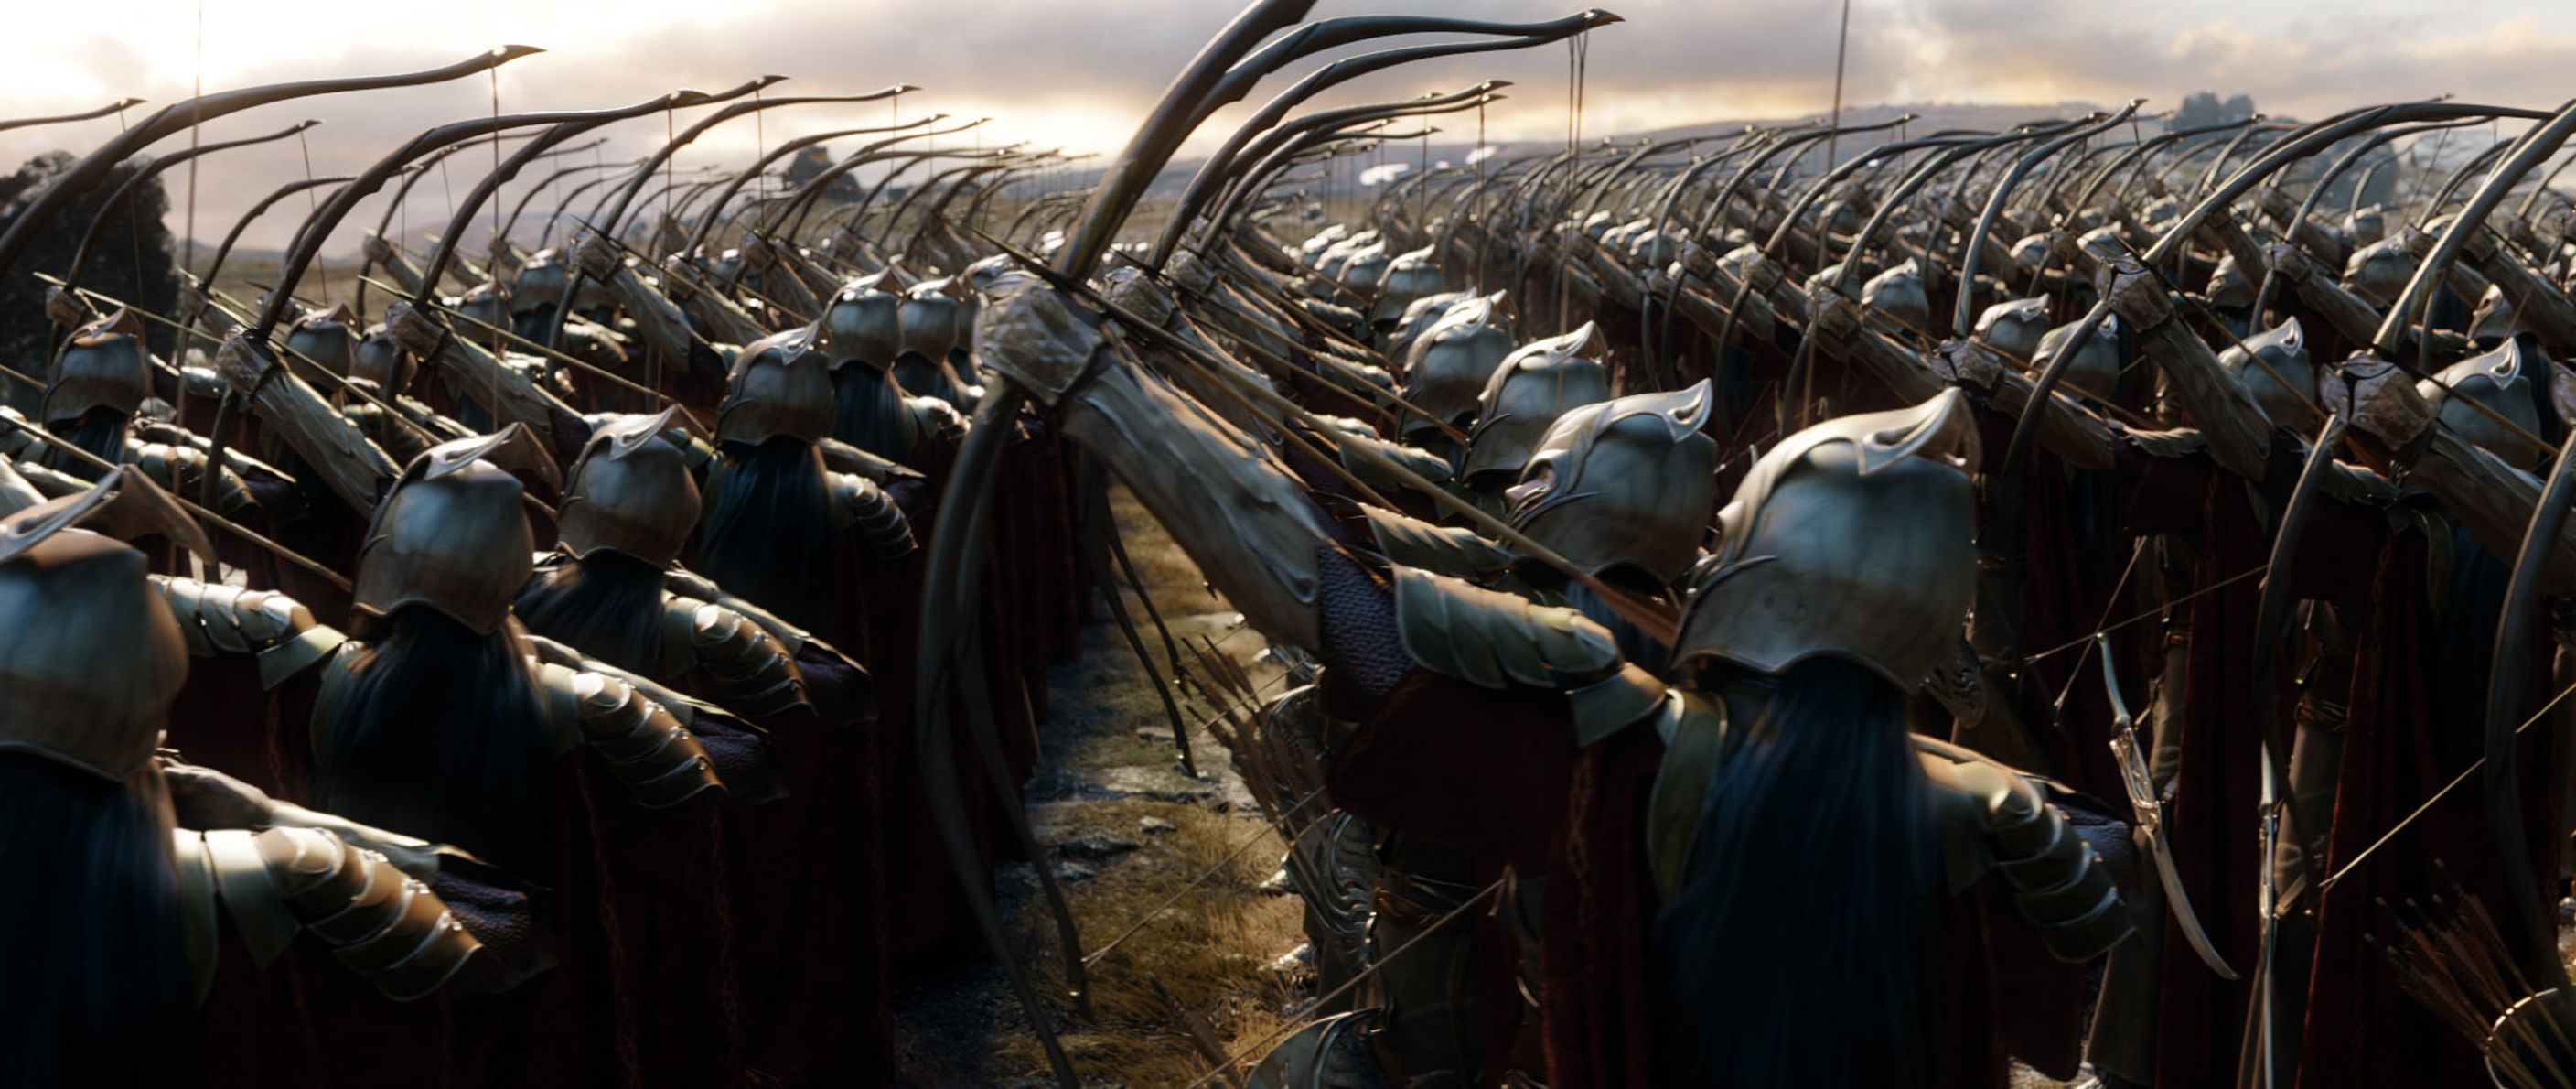 Army ready to shoot arrows - The Battle of the Five Armies